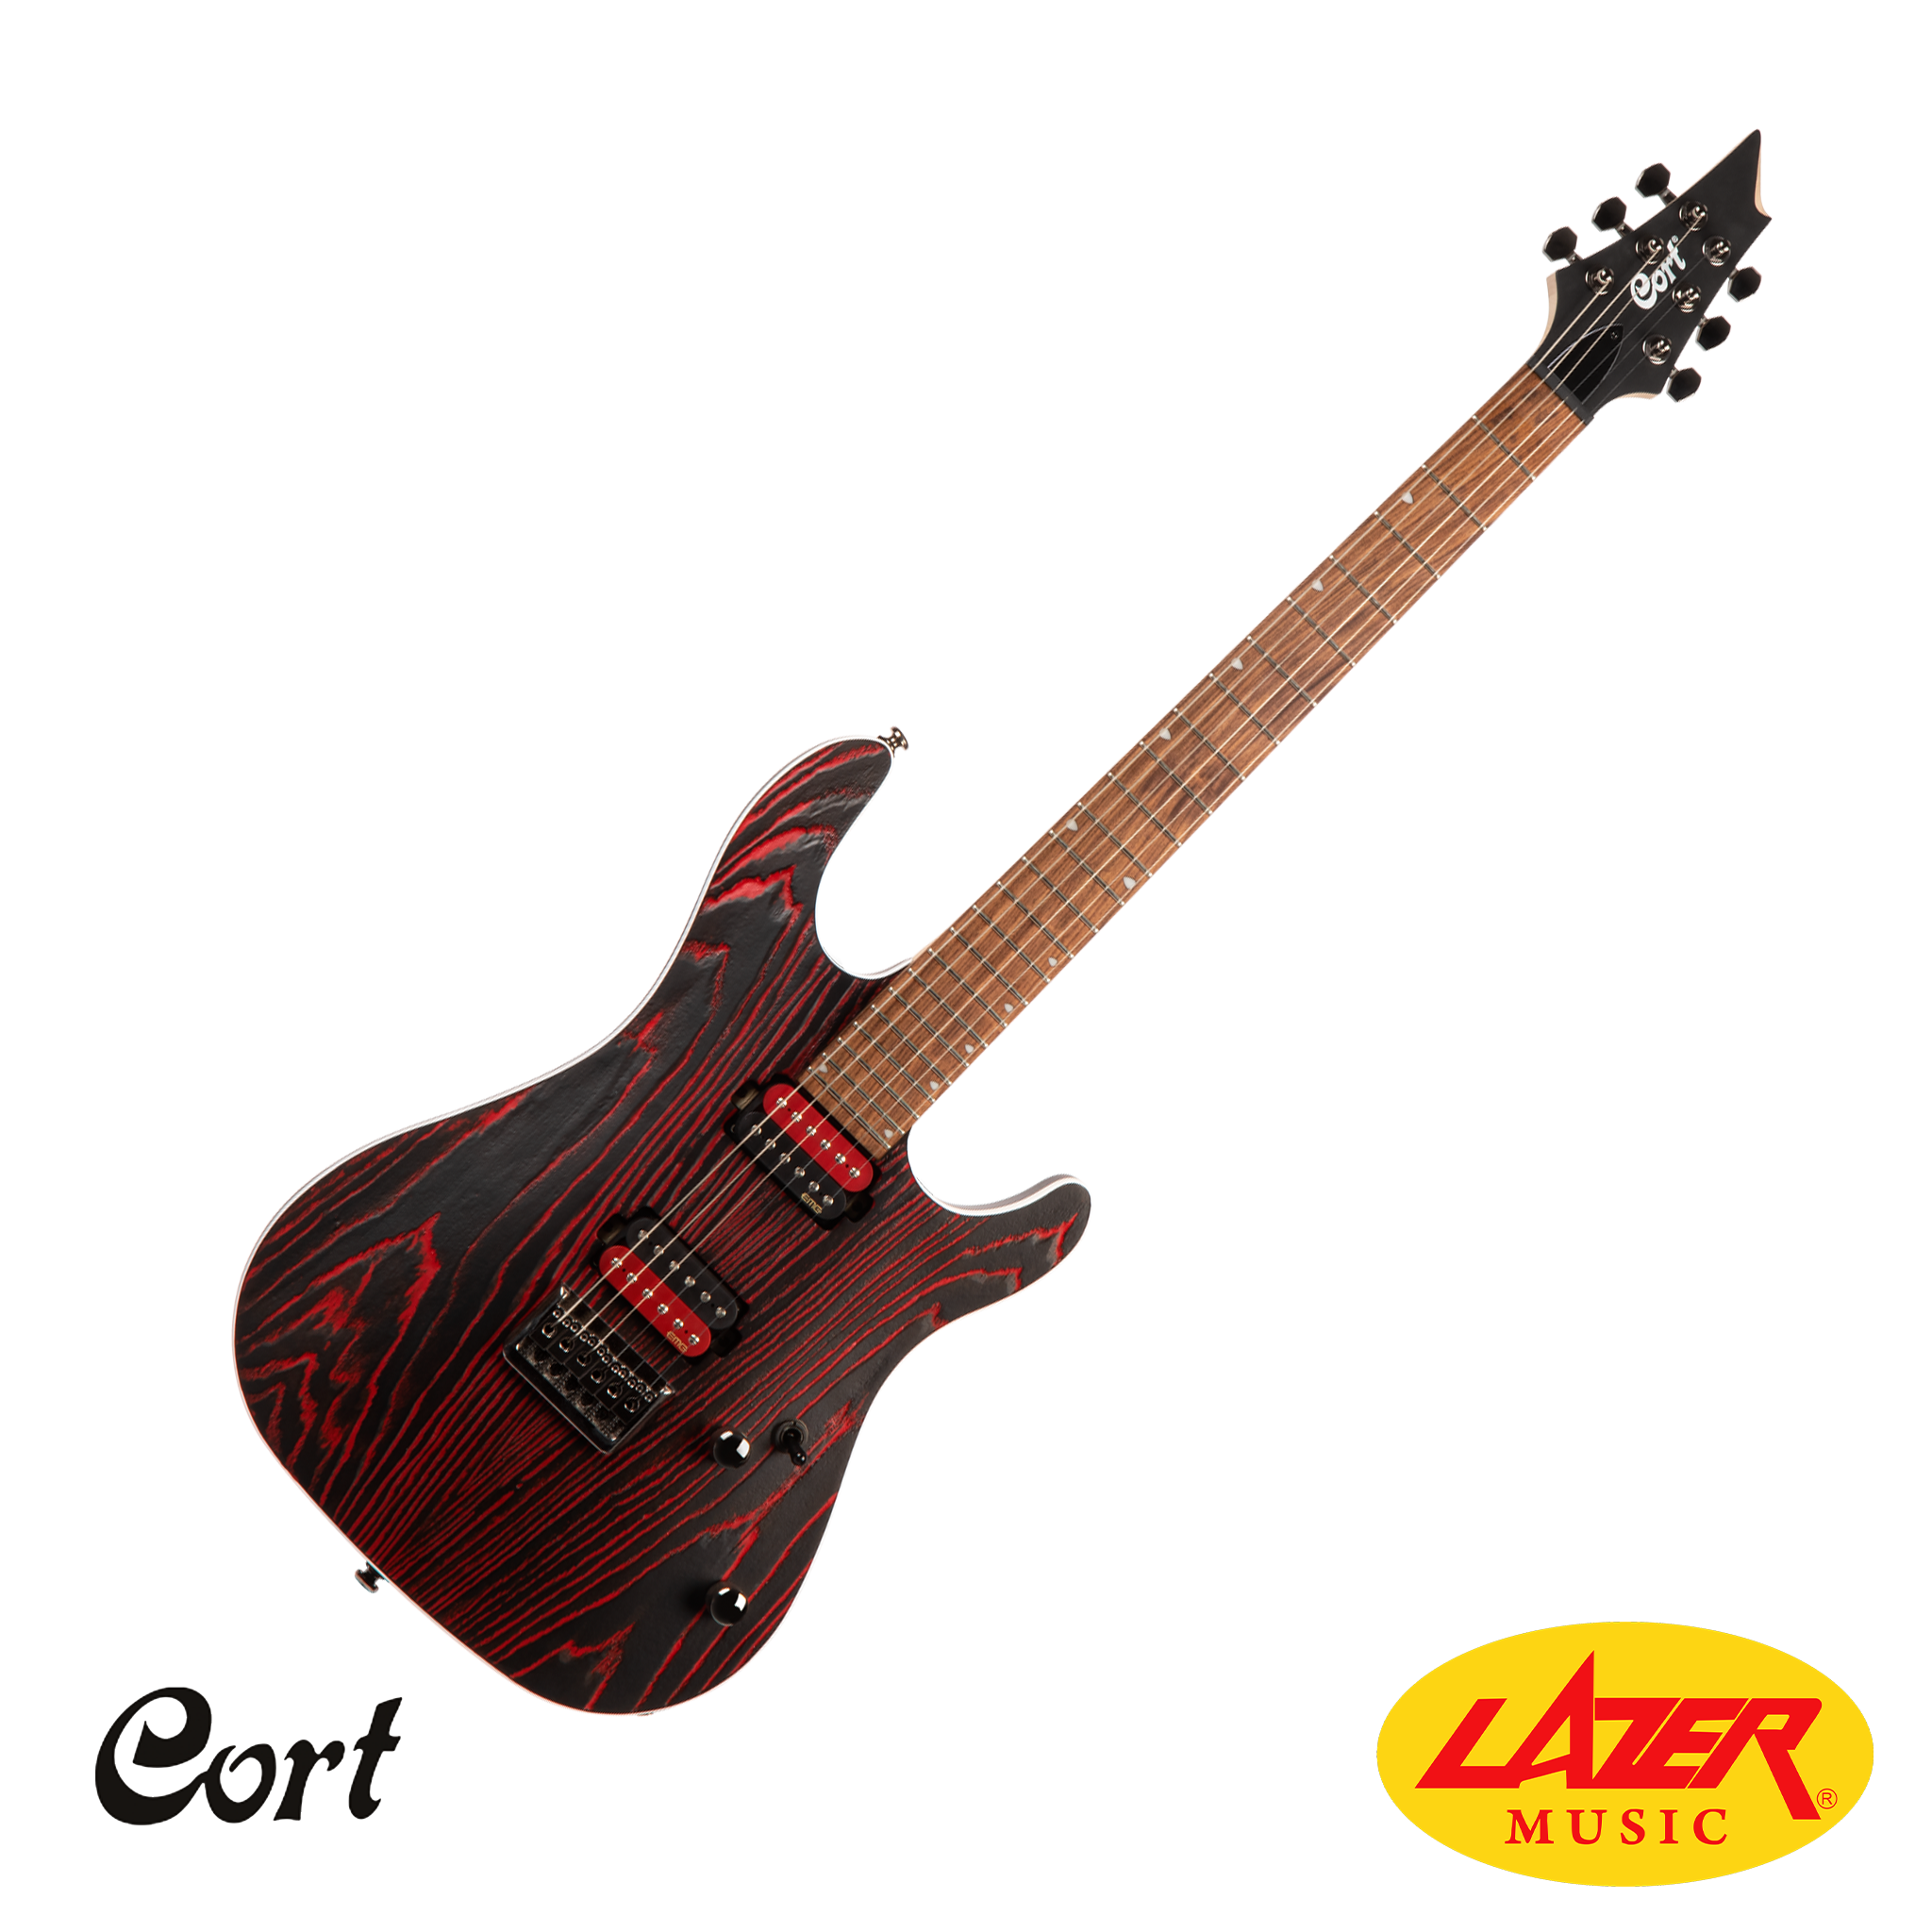 Cort KX300 Etched-EBR Electric Gutar With Bag